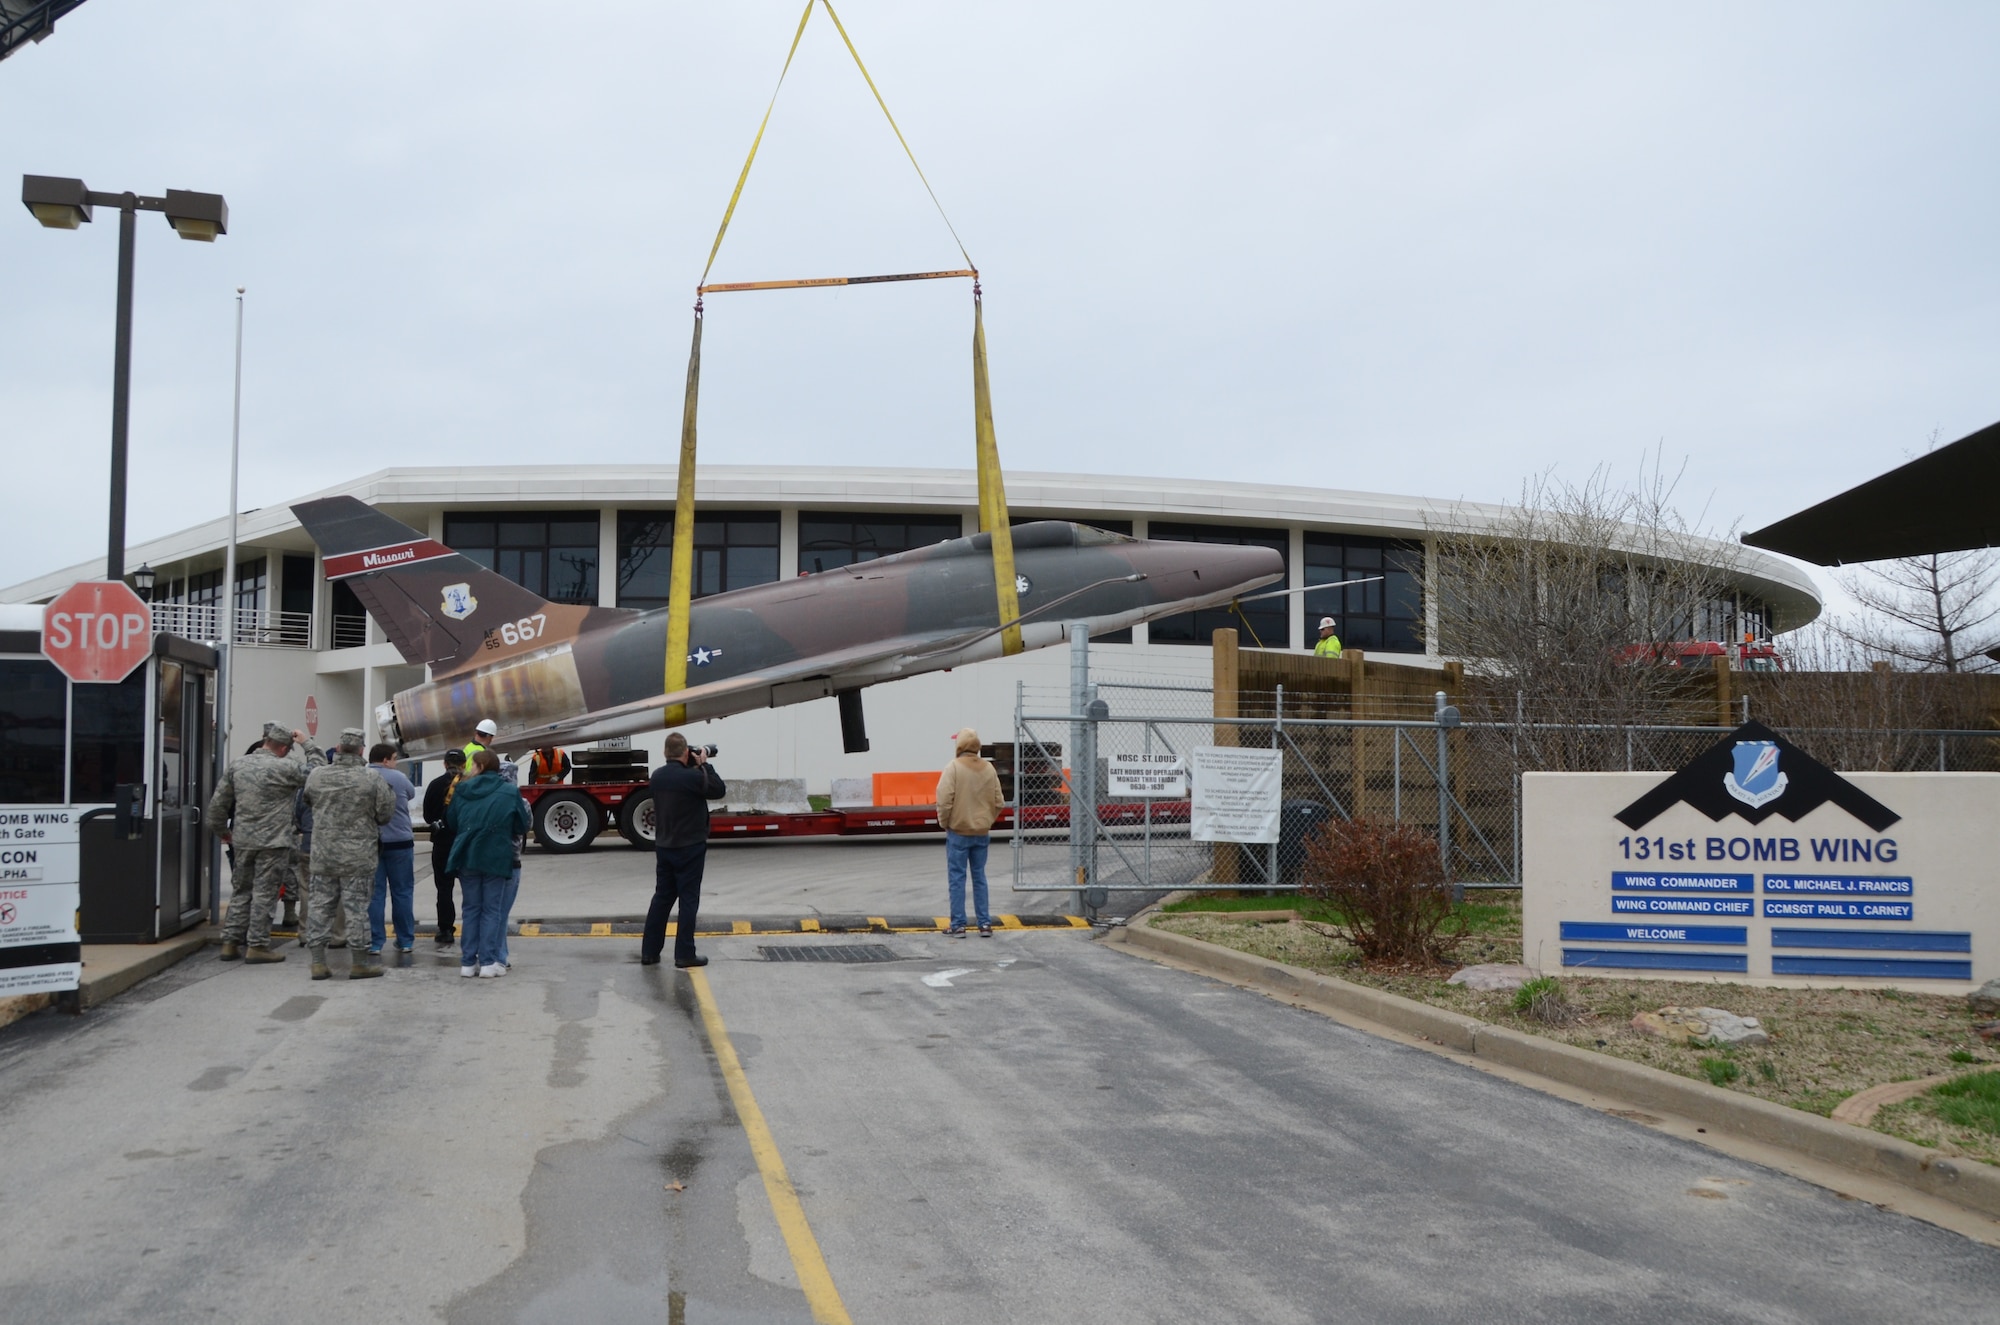 An F-100 Super Sabre jet (AF55-667) on static display at the Missouri Air National Guard’s 131st Bomb Wing base at Lambert-St. Louis International Airport, is removed from its pedestal, April 3, 2015. A total of three static display aircraft, including an F-15A Eagle and an F-4 Phantom II, will be transported to a new home at the planned 131st Bomb Wing Heritage Park at Whiteman Air Force Base, Mo. (U.S. Air National Guard photo by Senior Master Sgt. Mary-Dale Amison)